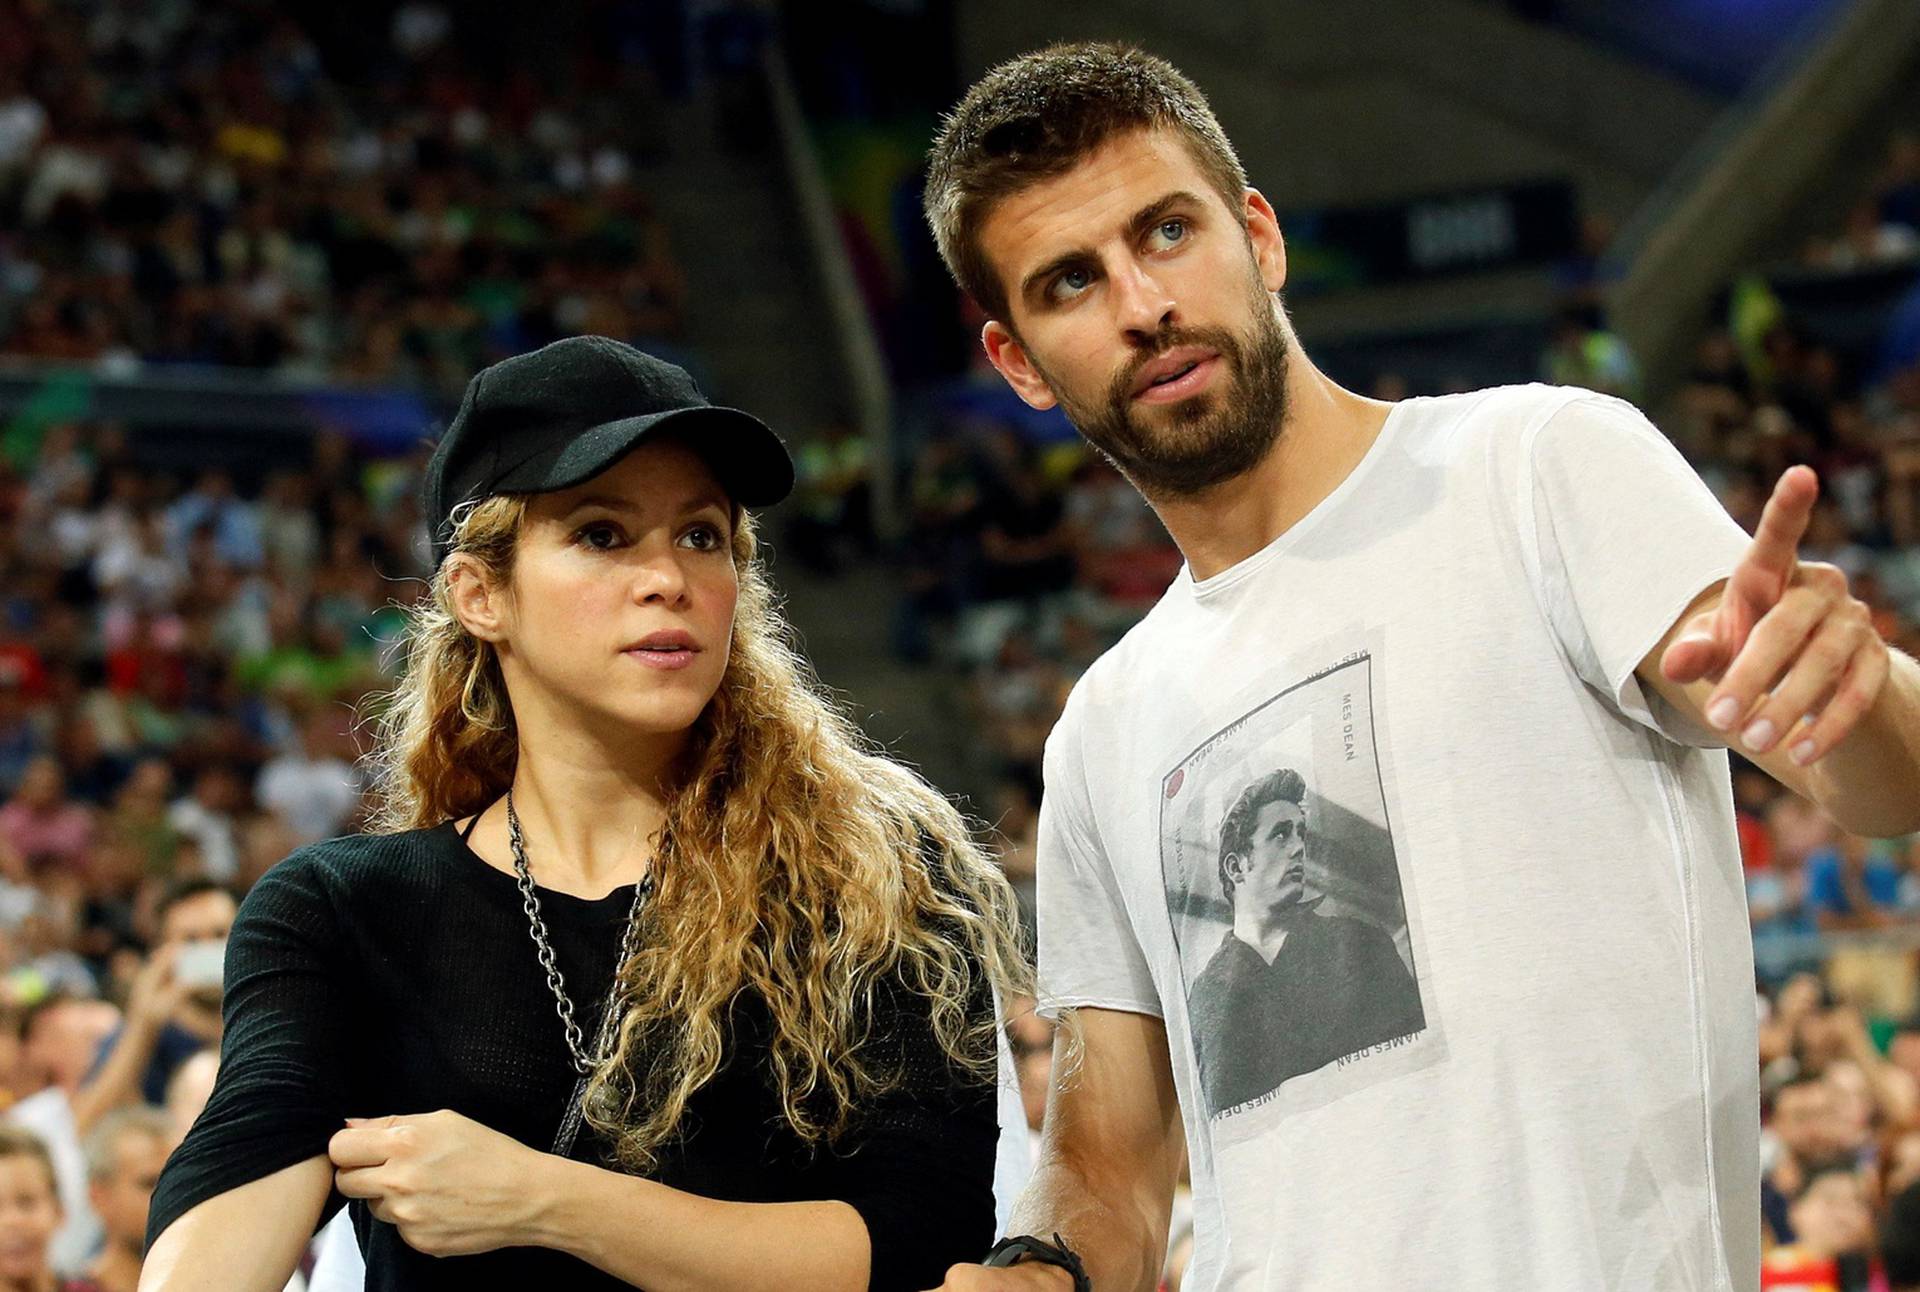 FILE PHOTO: Colombian singer Shakira and her partner, Barcelona soccer player Pique, attend the Basketball World Cup quarter-final game between the U.S. and Slovenia in Barcelona